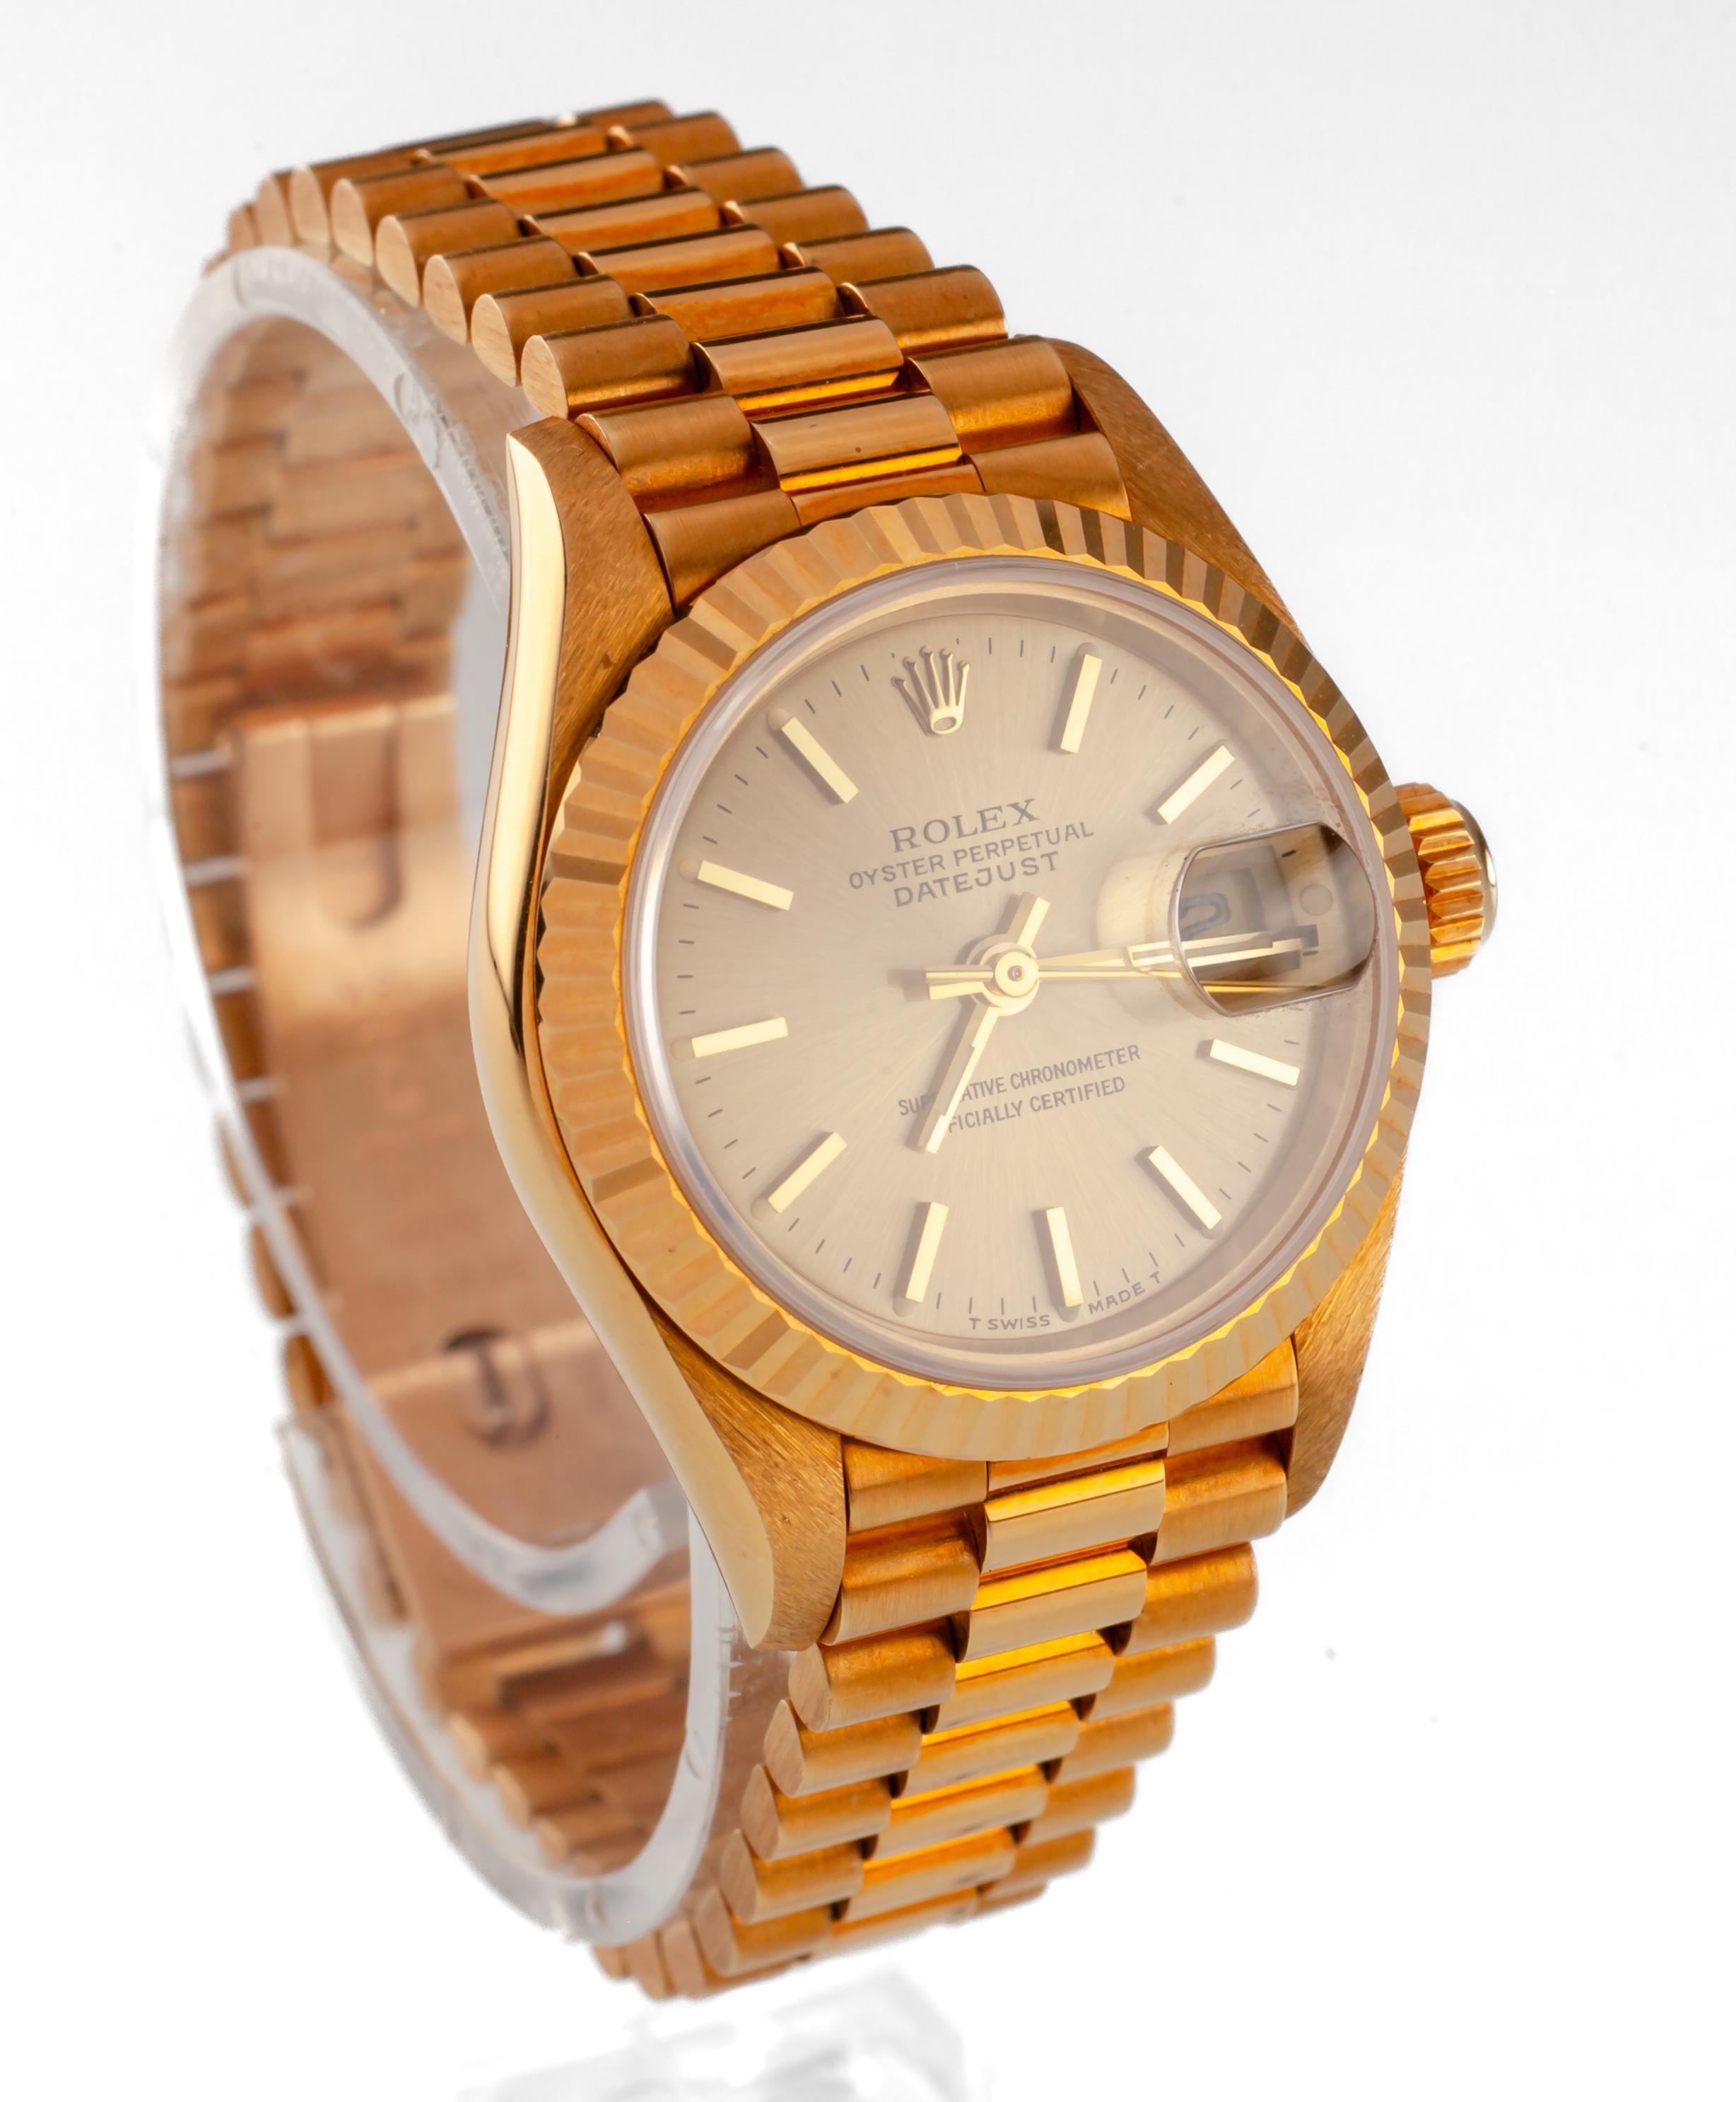 Rolex Women's 18k Yellow Gold President OPDJ 69178 w/ Box and Papers For Sale 8